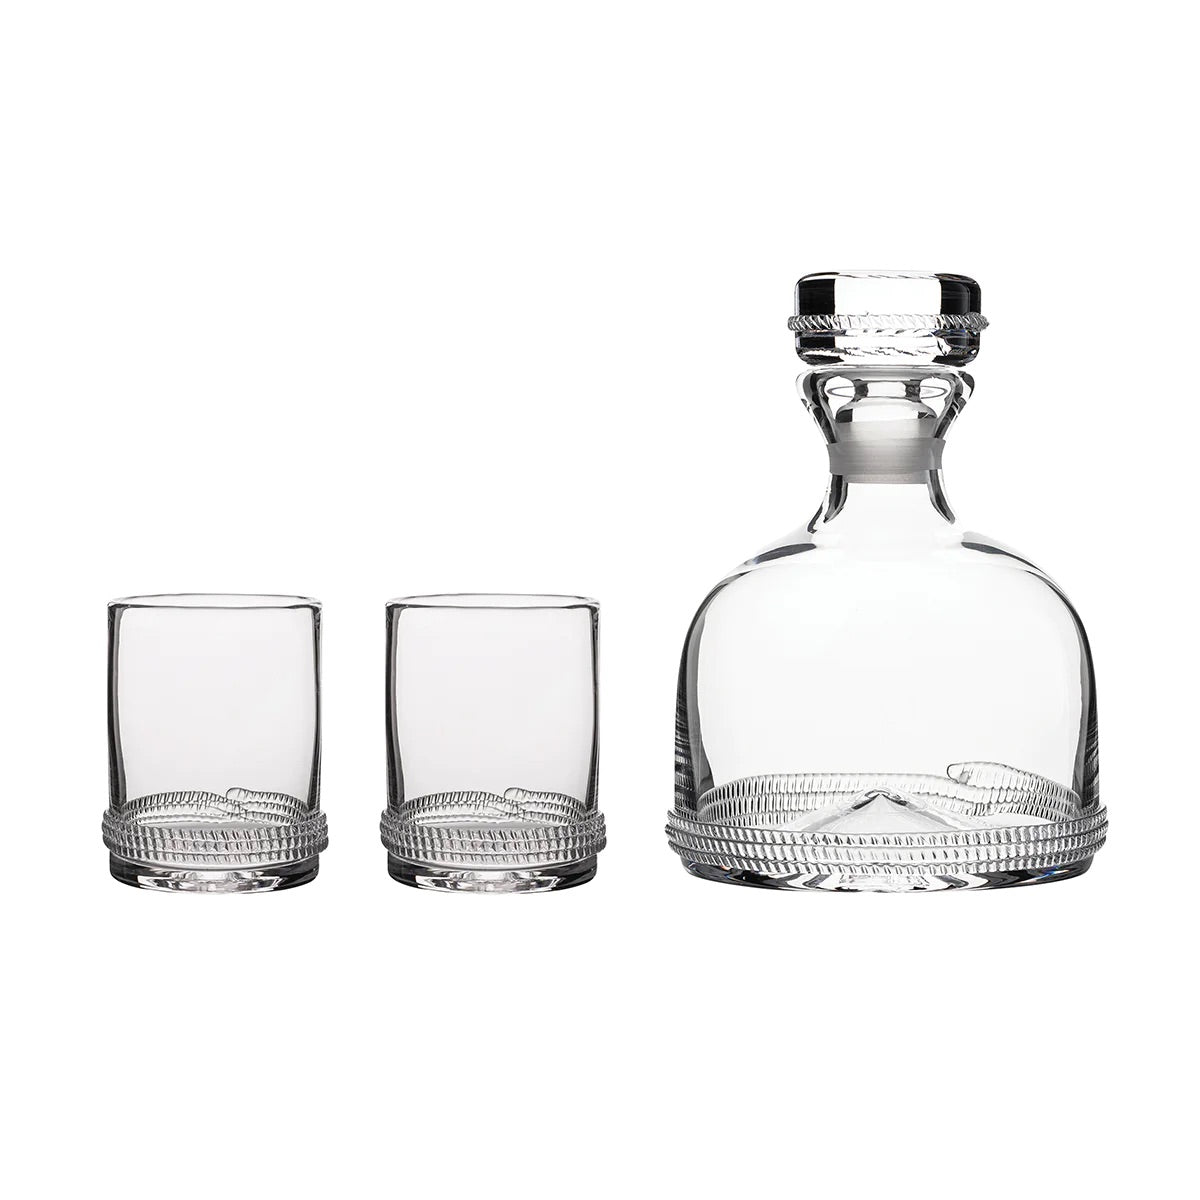 Dean Decanter and 2 Double Old Fashioned Glasses - 3 Piece Set